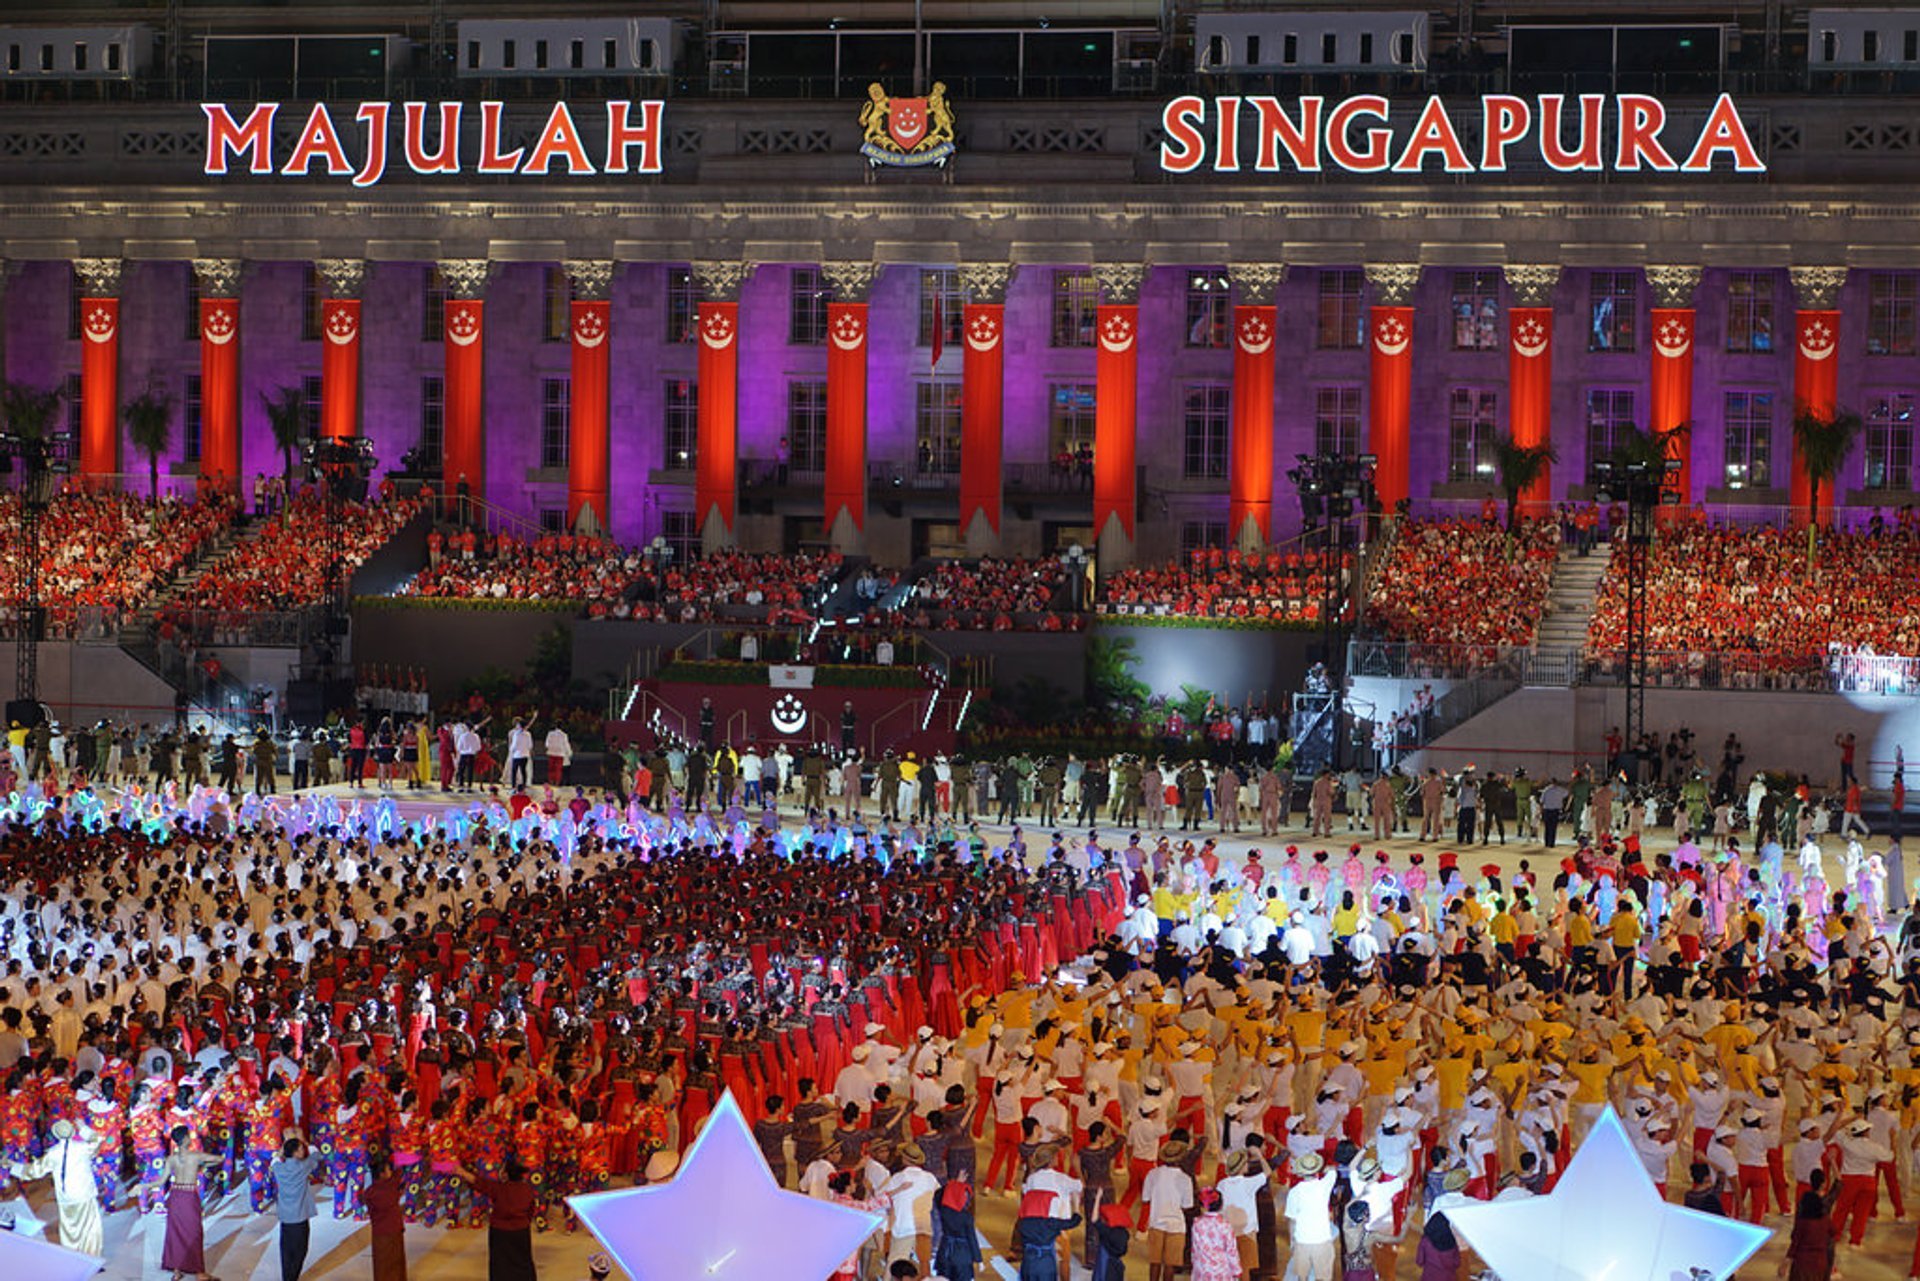 Singapore’s National Day